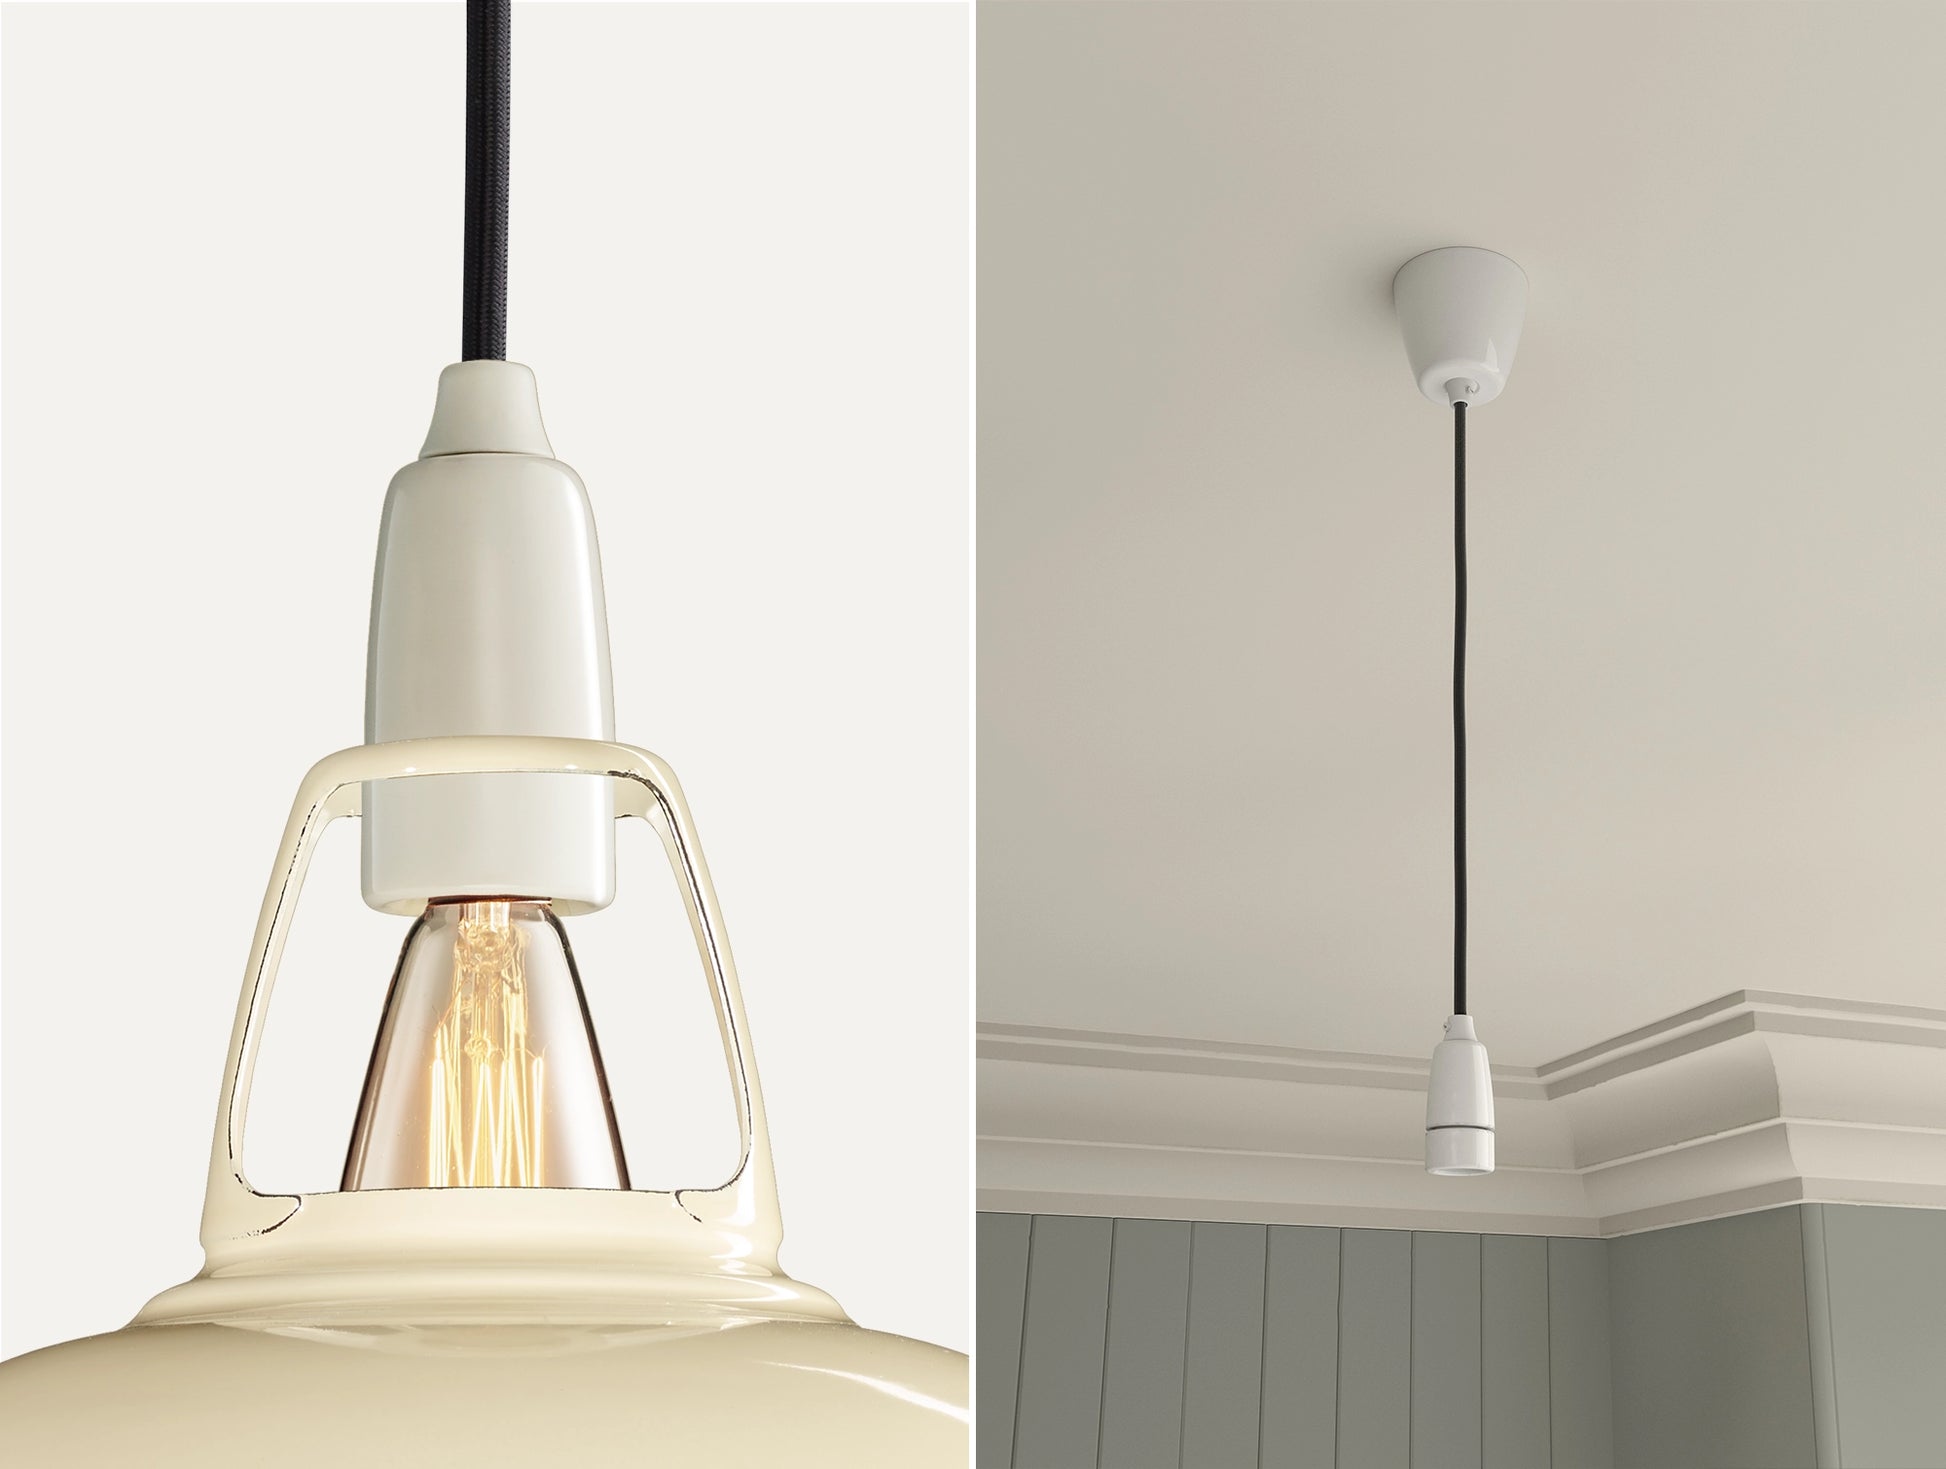 Close up of an E14 Porcelain suspension set on a Paper Cream lampshade on the left. On the right, an E14 Porcelain pendant set is hanging from the ceiling